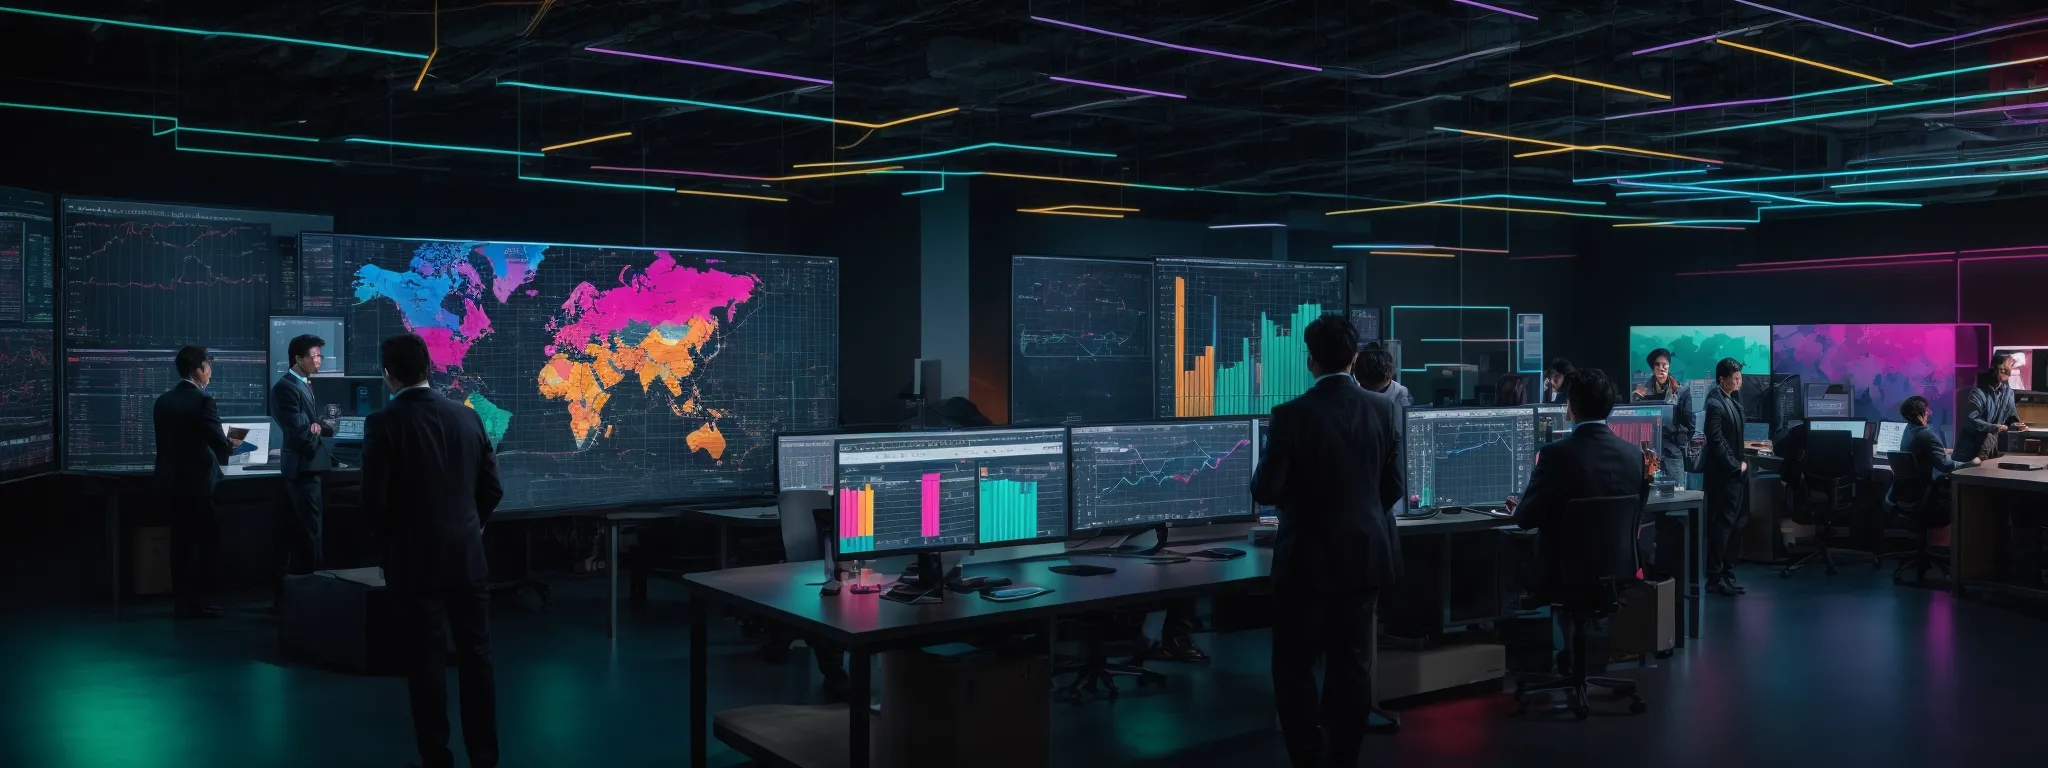 a diverse team of professionals collaboratively brainstorming around a large, glowing computer screen displaying colorful data analytics charts.